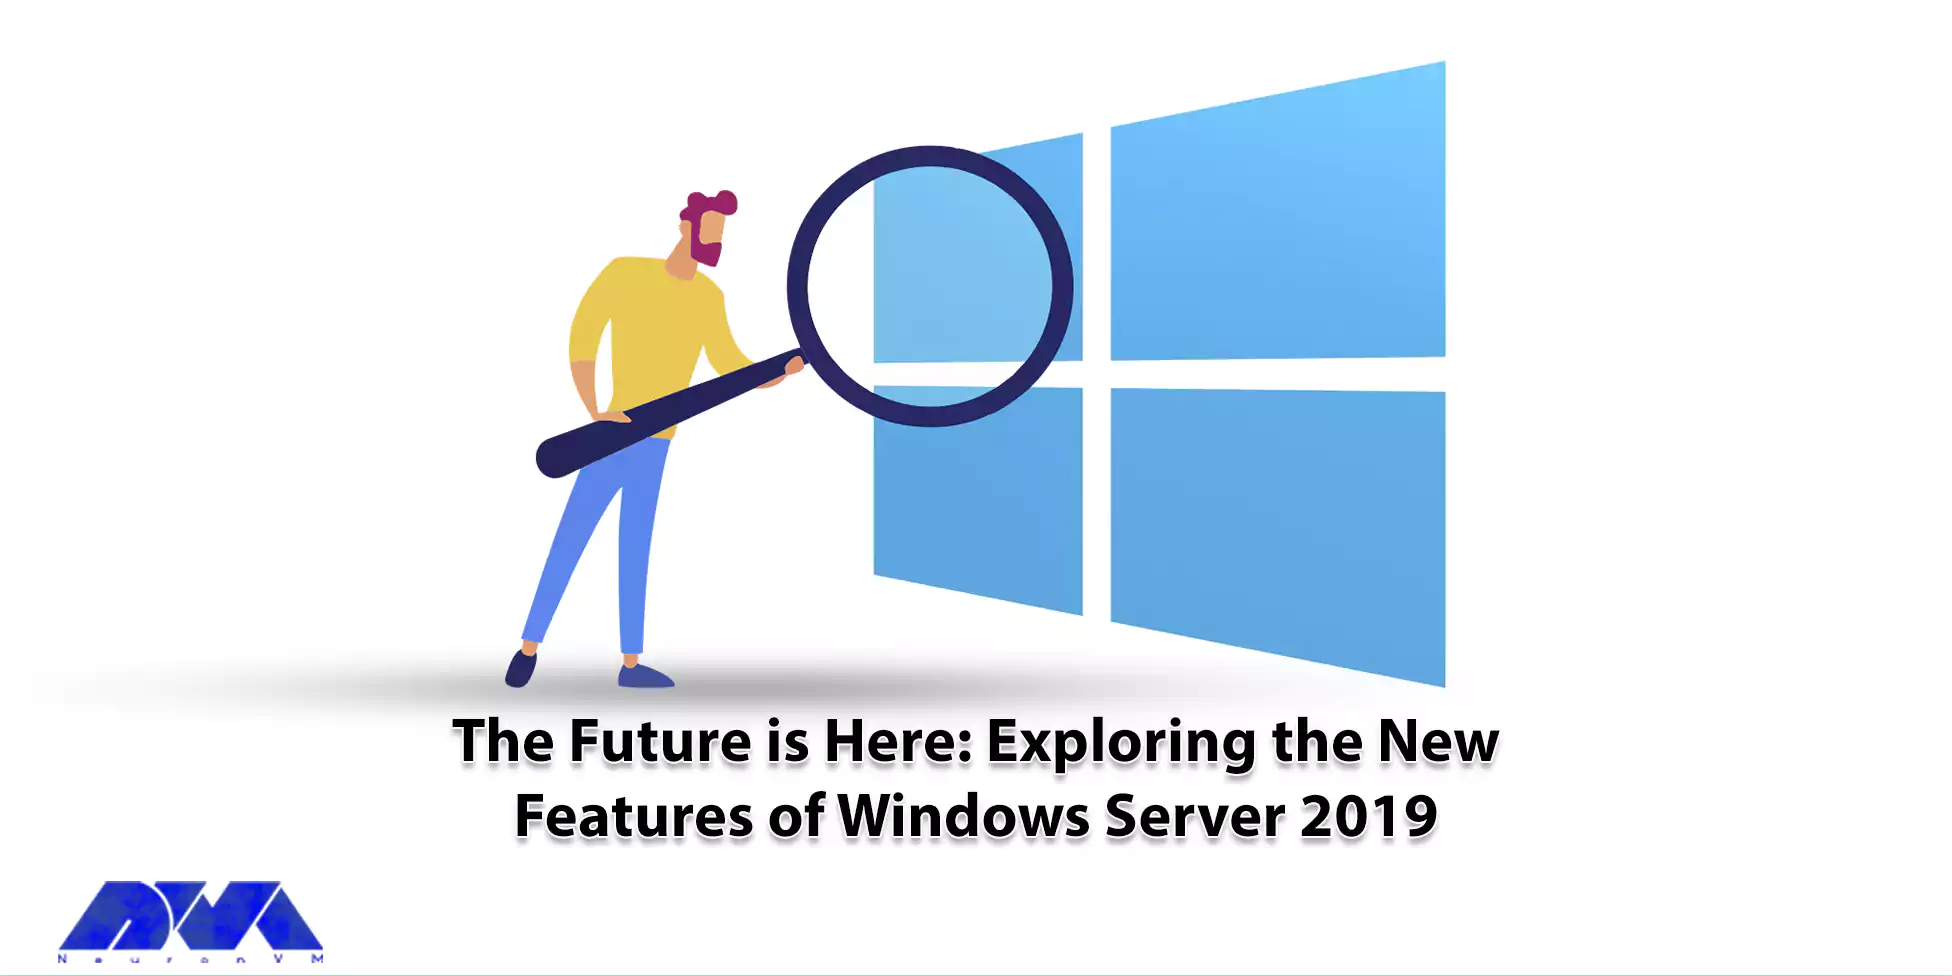 The Future is Here Exploring the New Features of Windows Server 2019